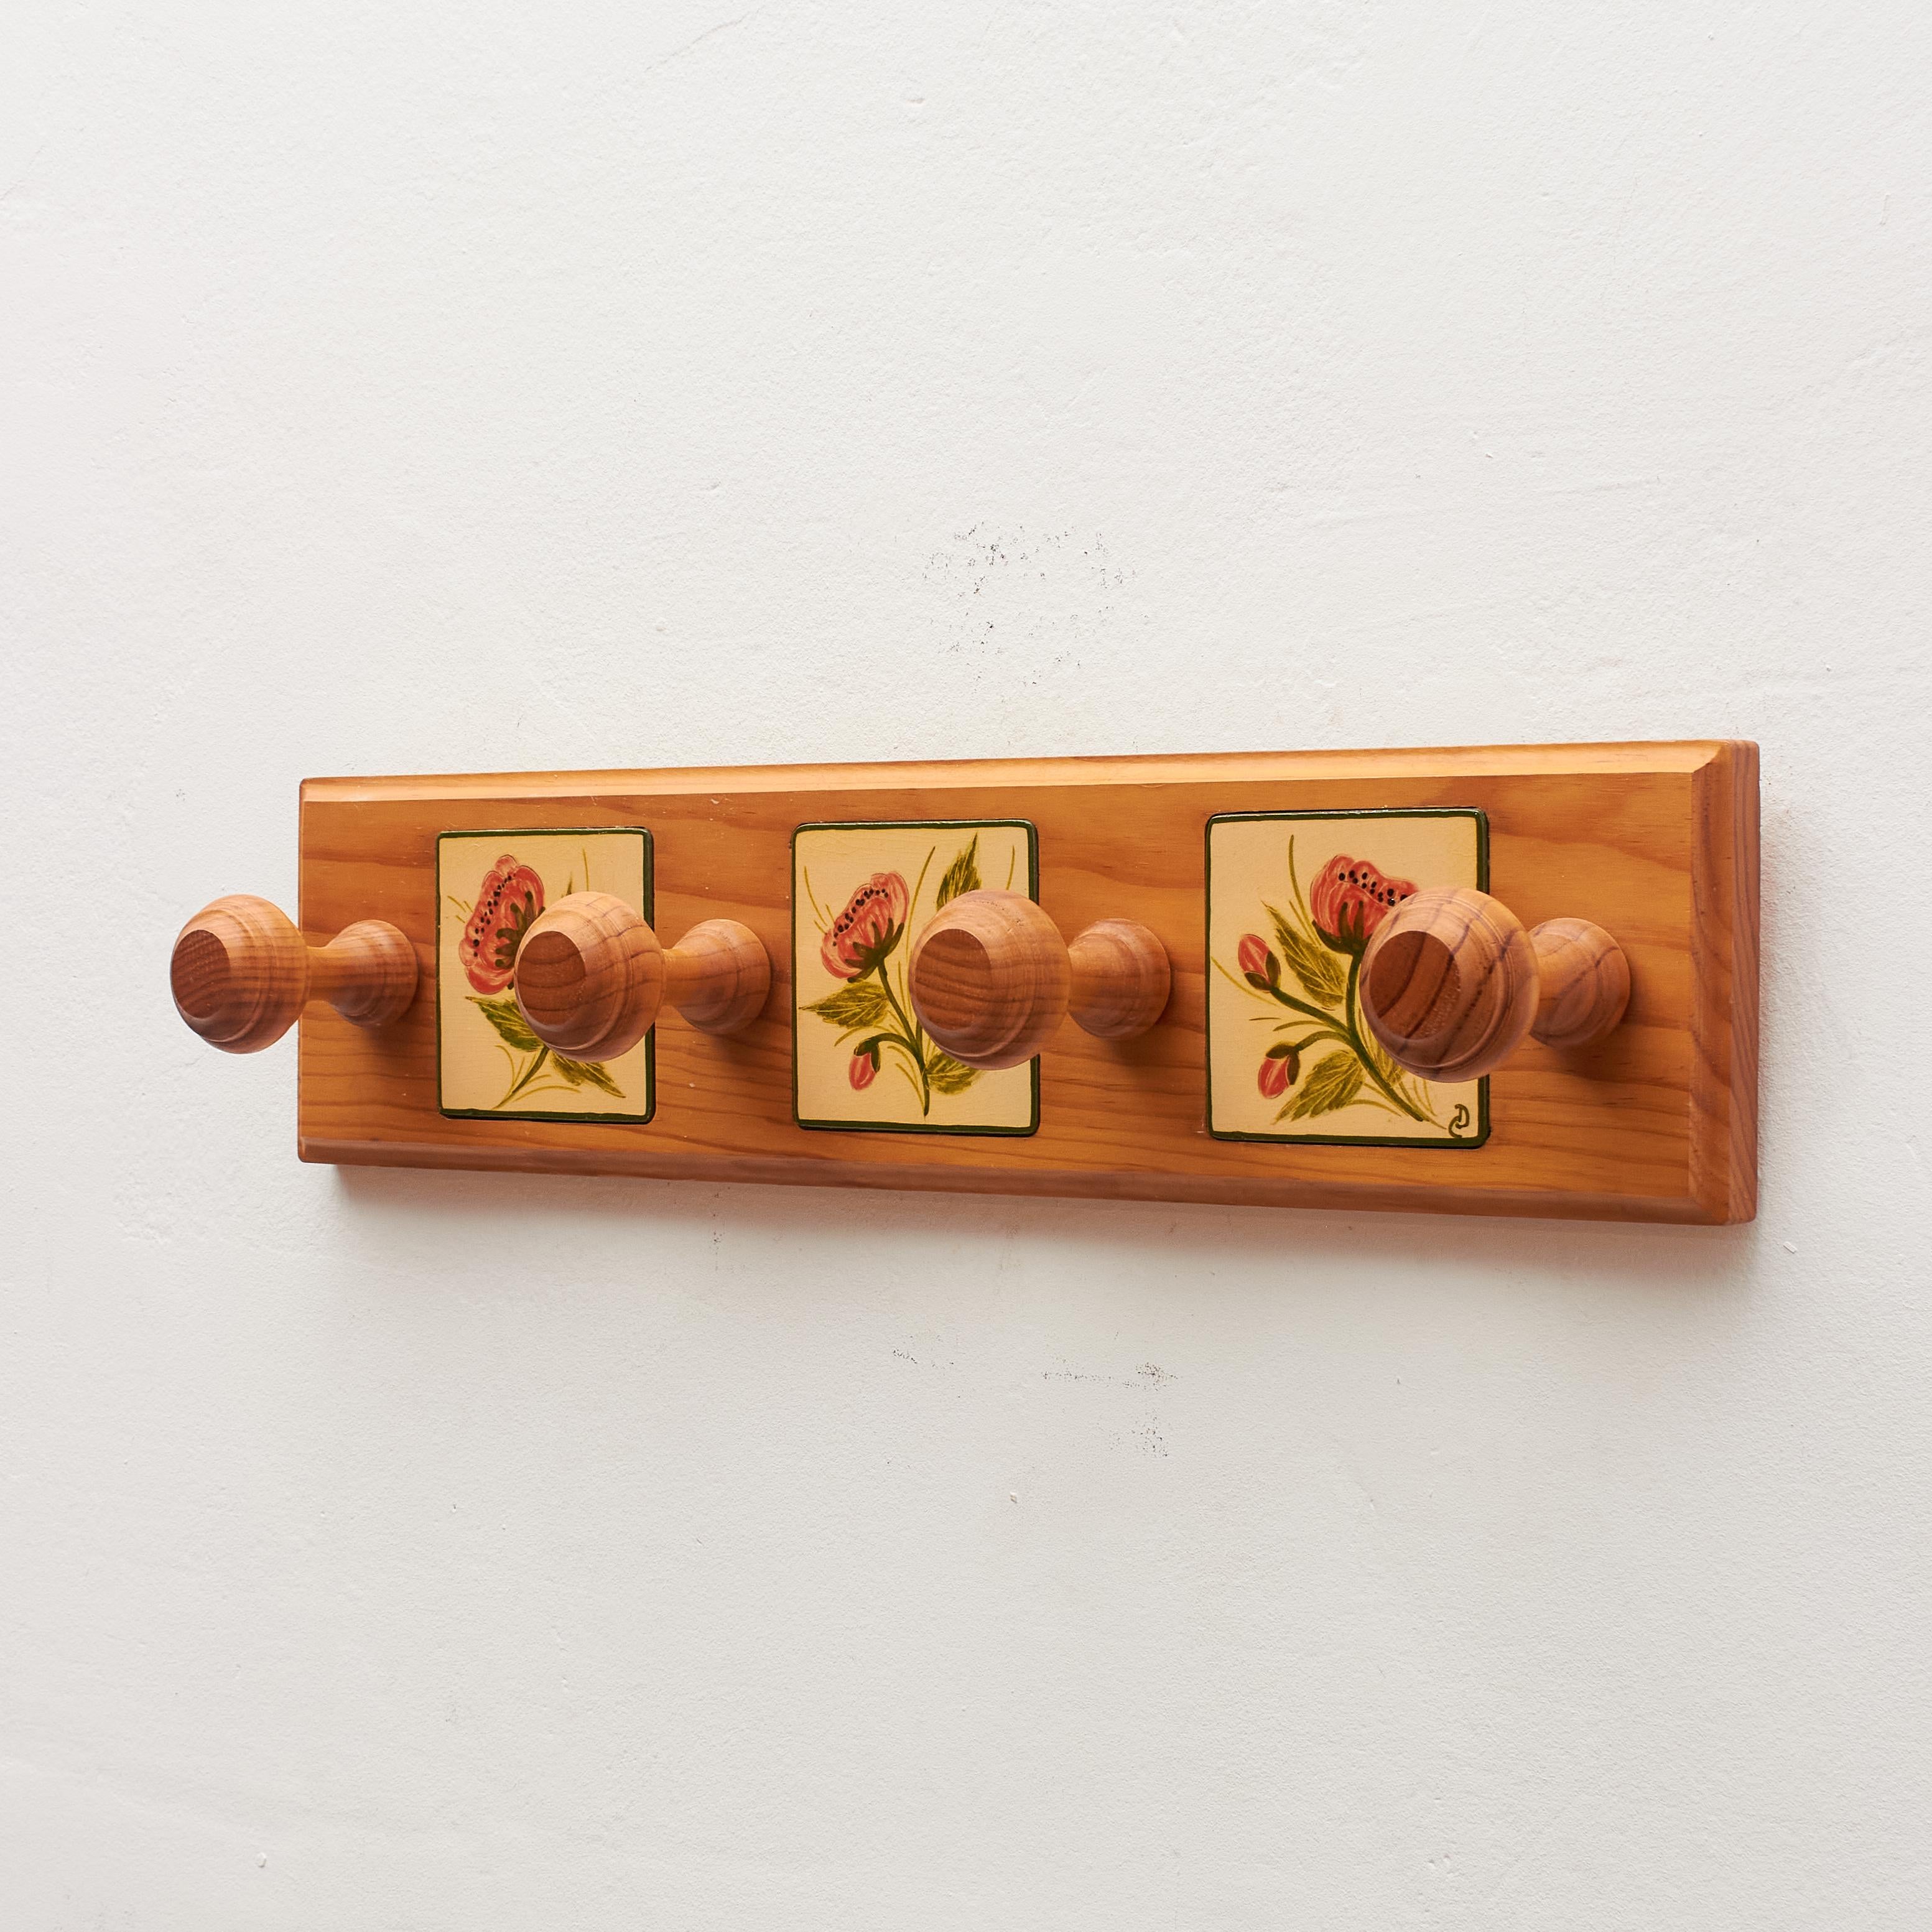 Diaz Costa Wood and Hand Painted Ceramic Wall Hanger, circa 1960 In Good Condition For Sale In Barcelona, Barcelona